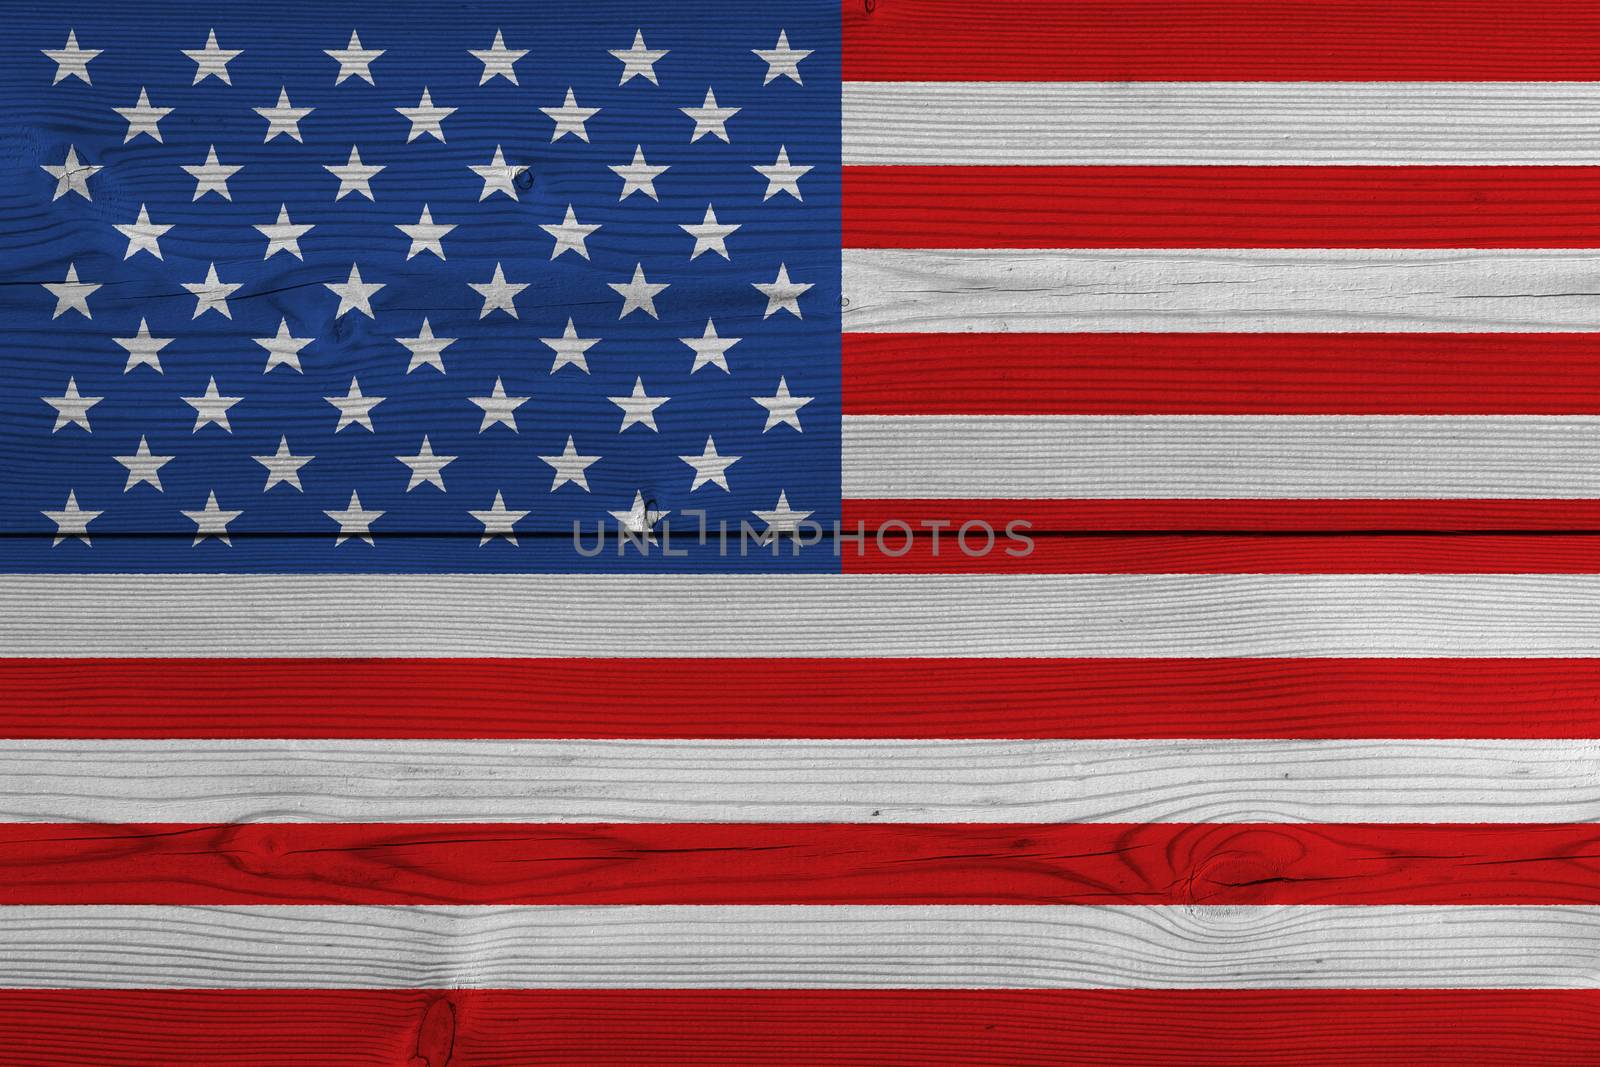 United States of America flag painted on old wood plank. Patriotic background. National flag of United States of America